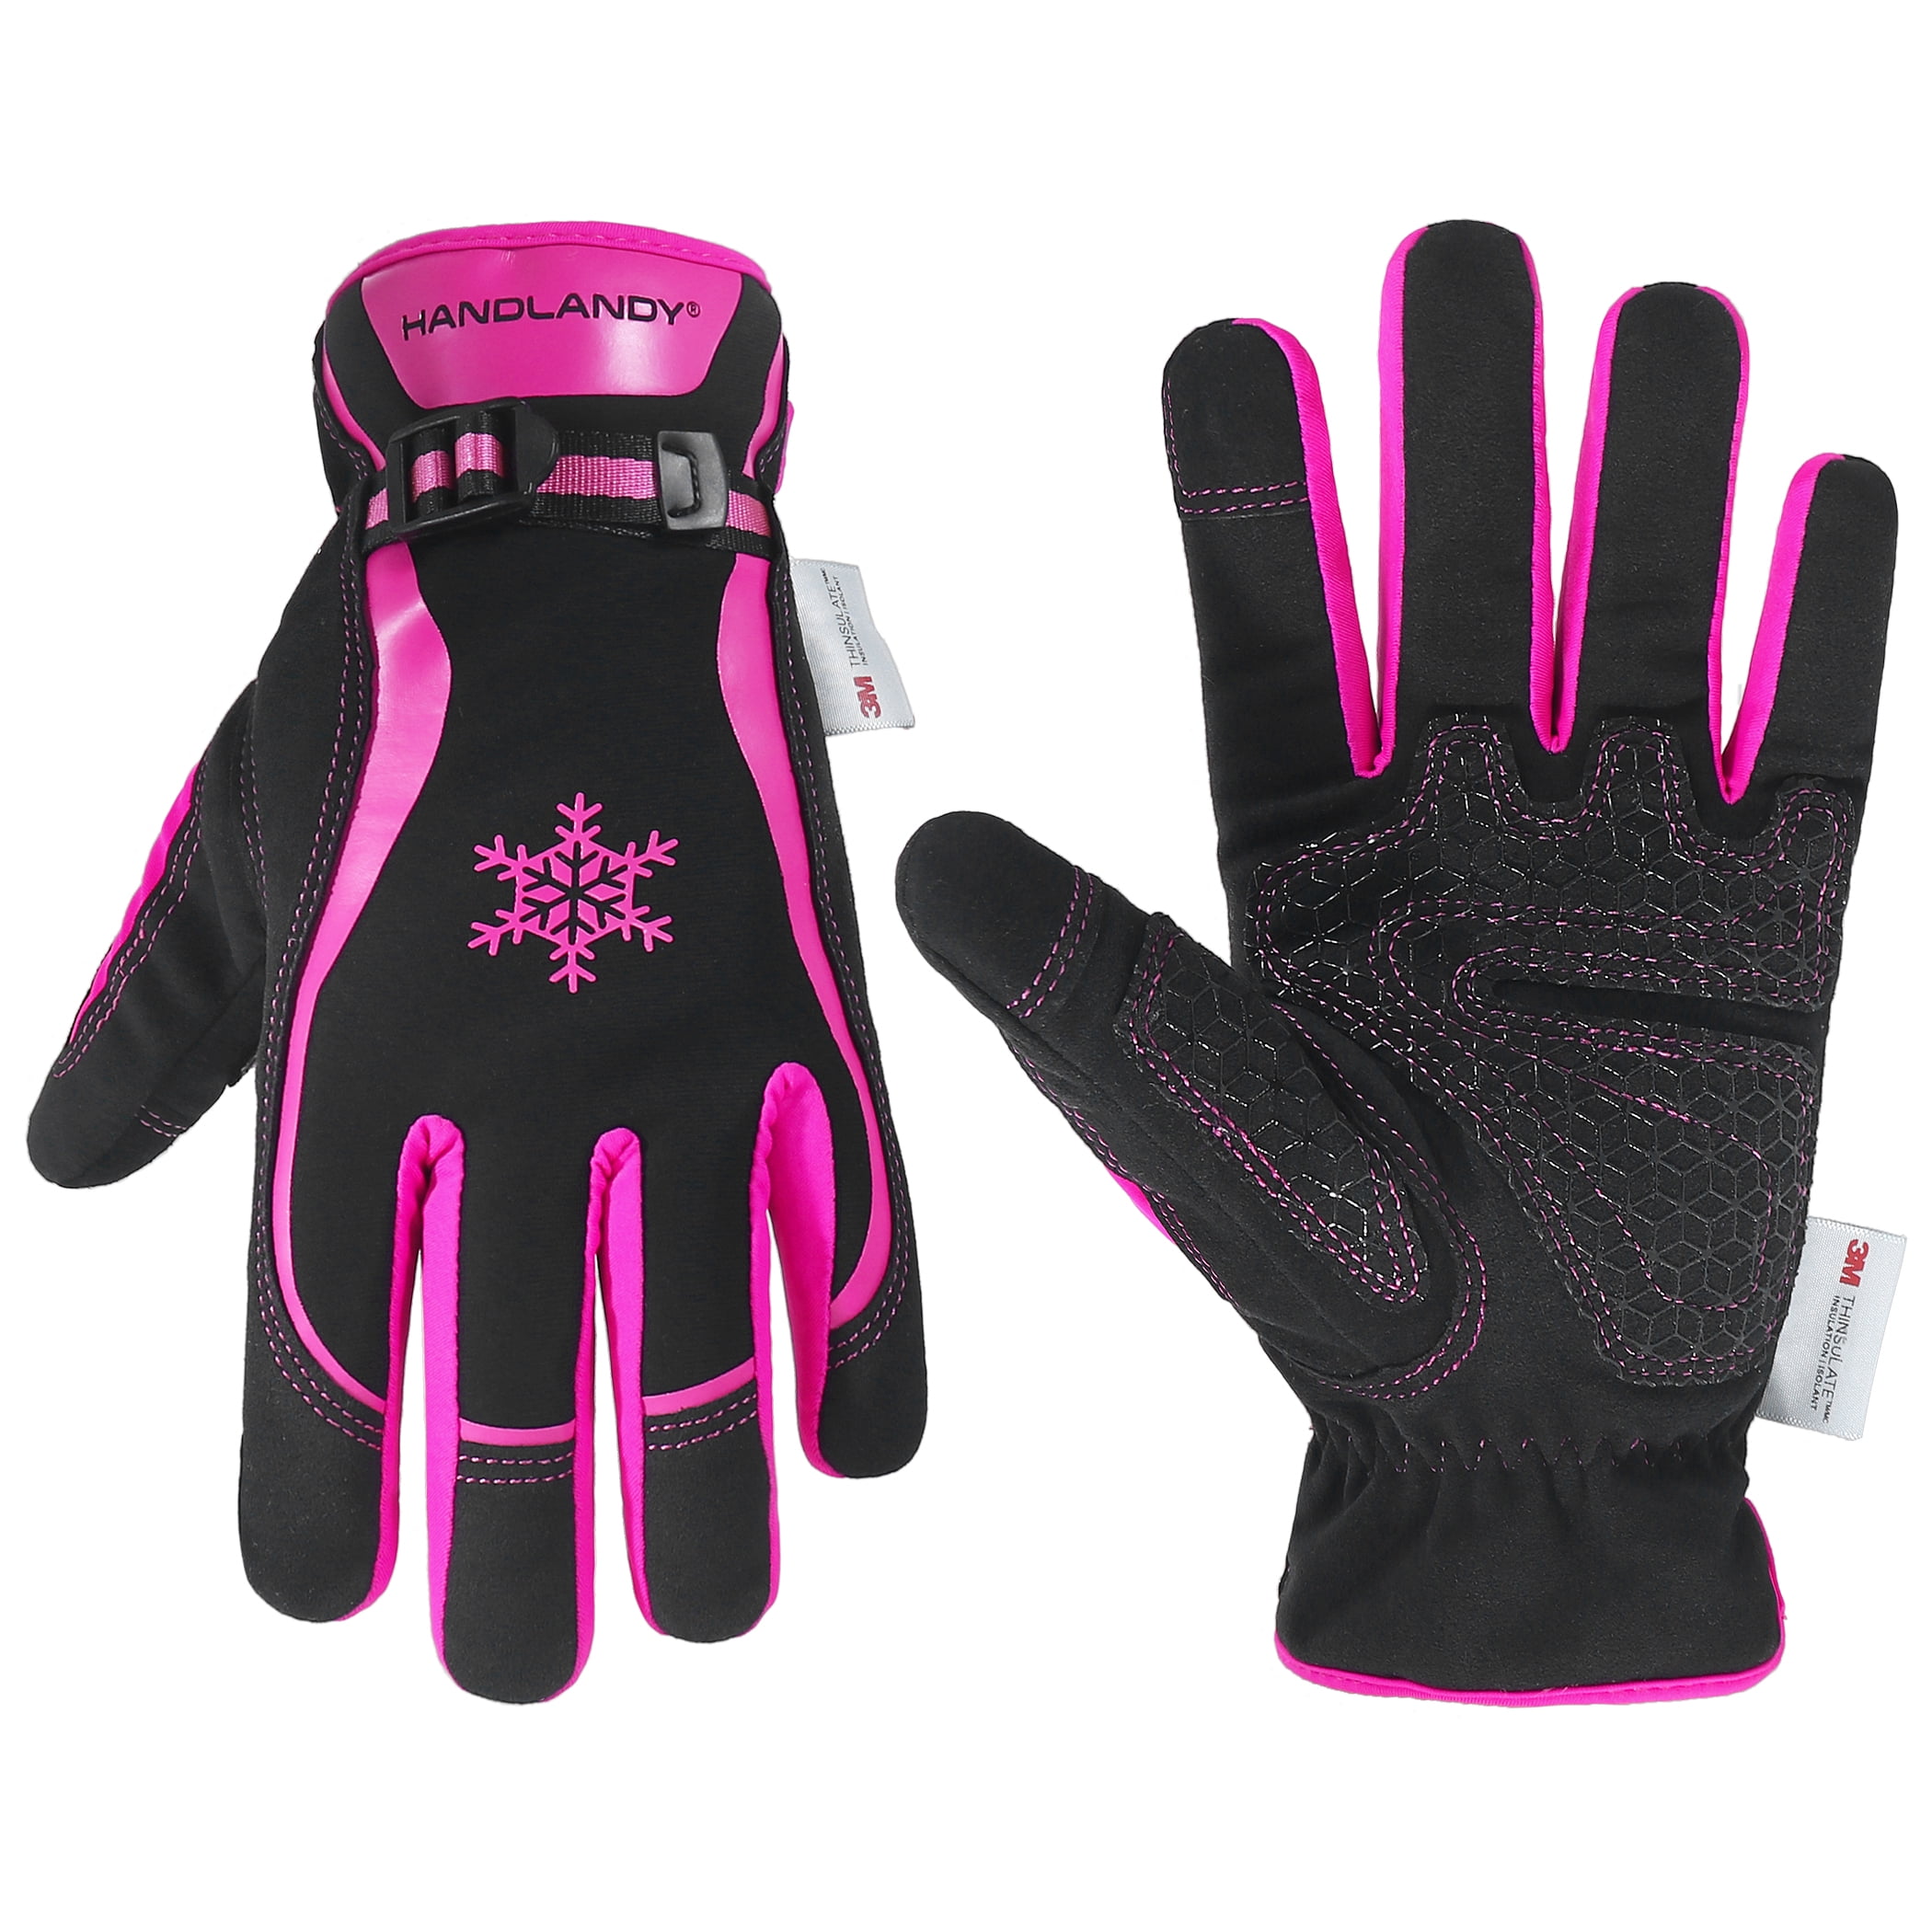 DENALY Quilting Gloves for Free-Motion Sewing Fabric Adhesives Safety Work  Gloves Sports Gloves (Pink, Large)